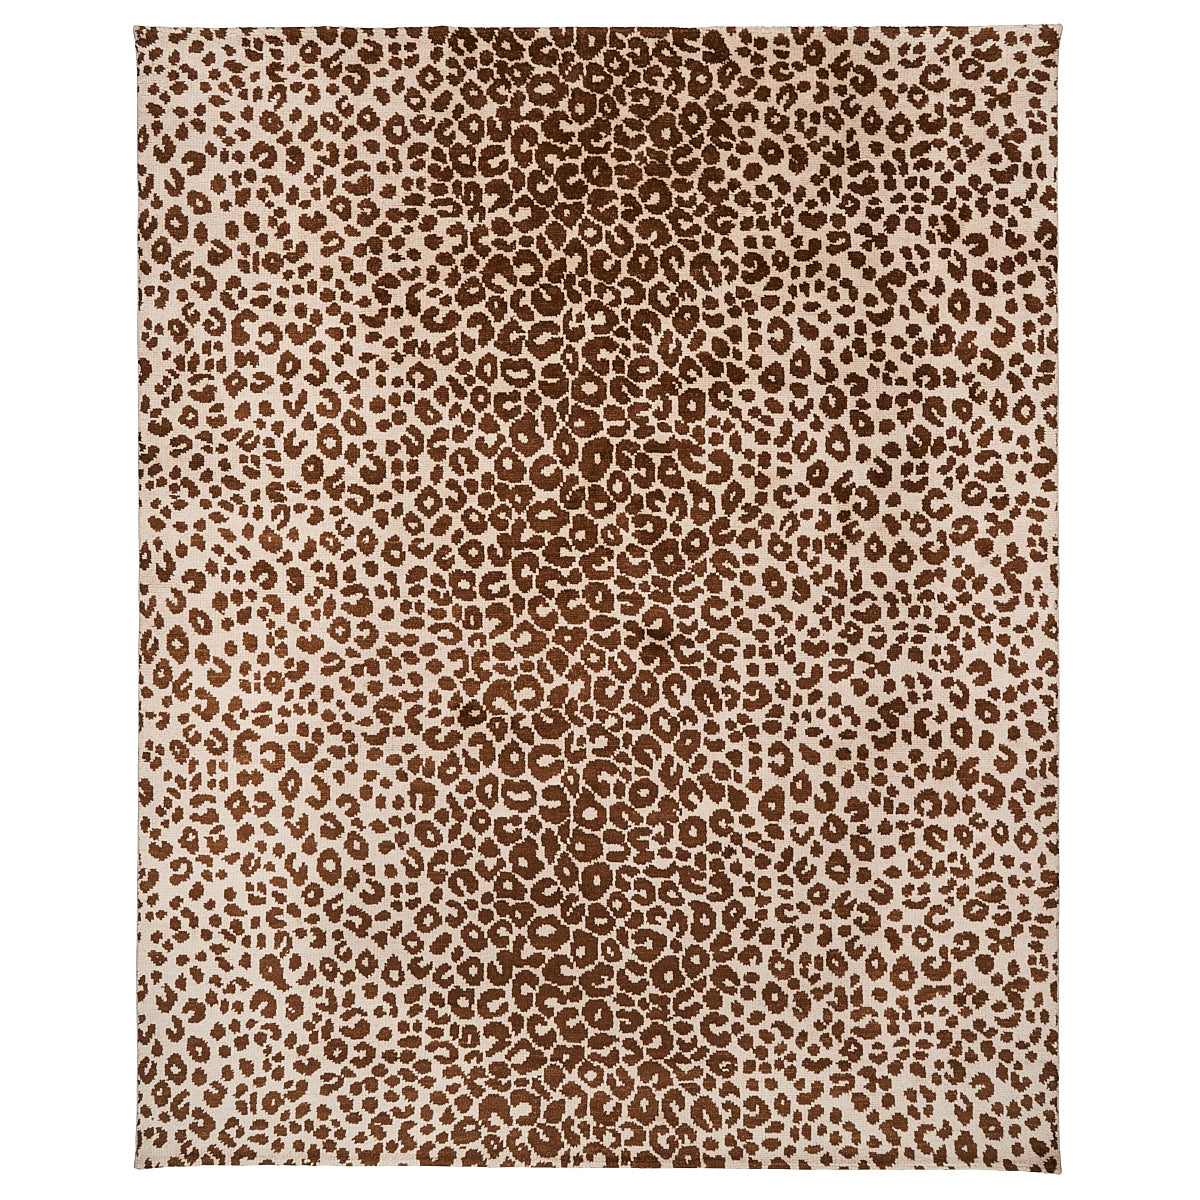 Iconic Leopard Hand-Knotted Rug -Brown